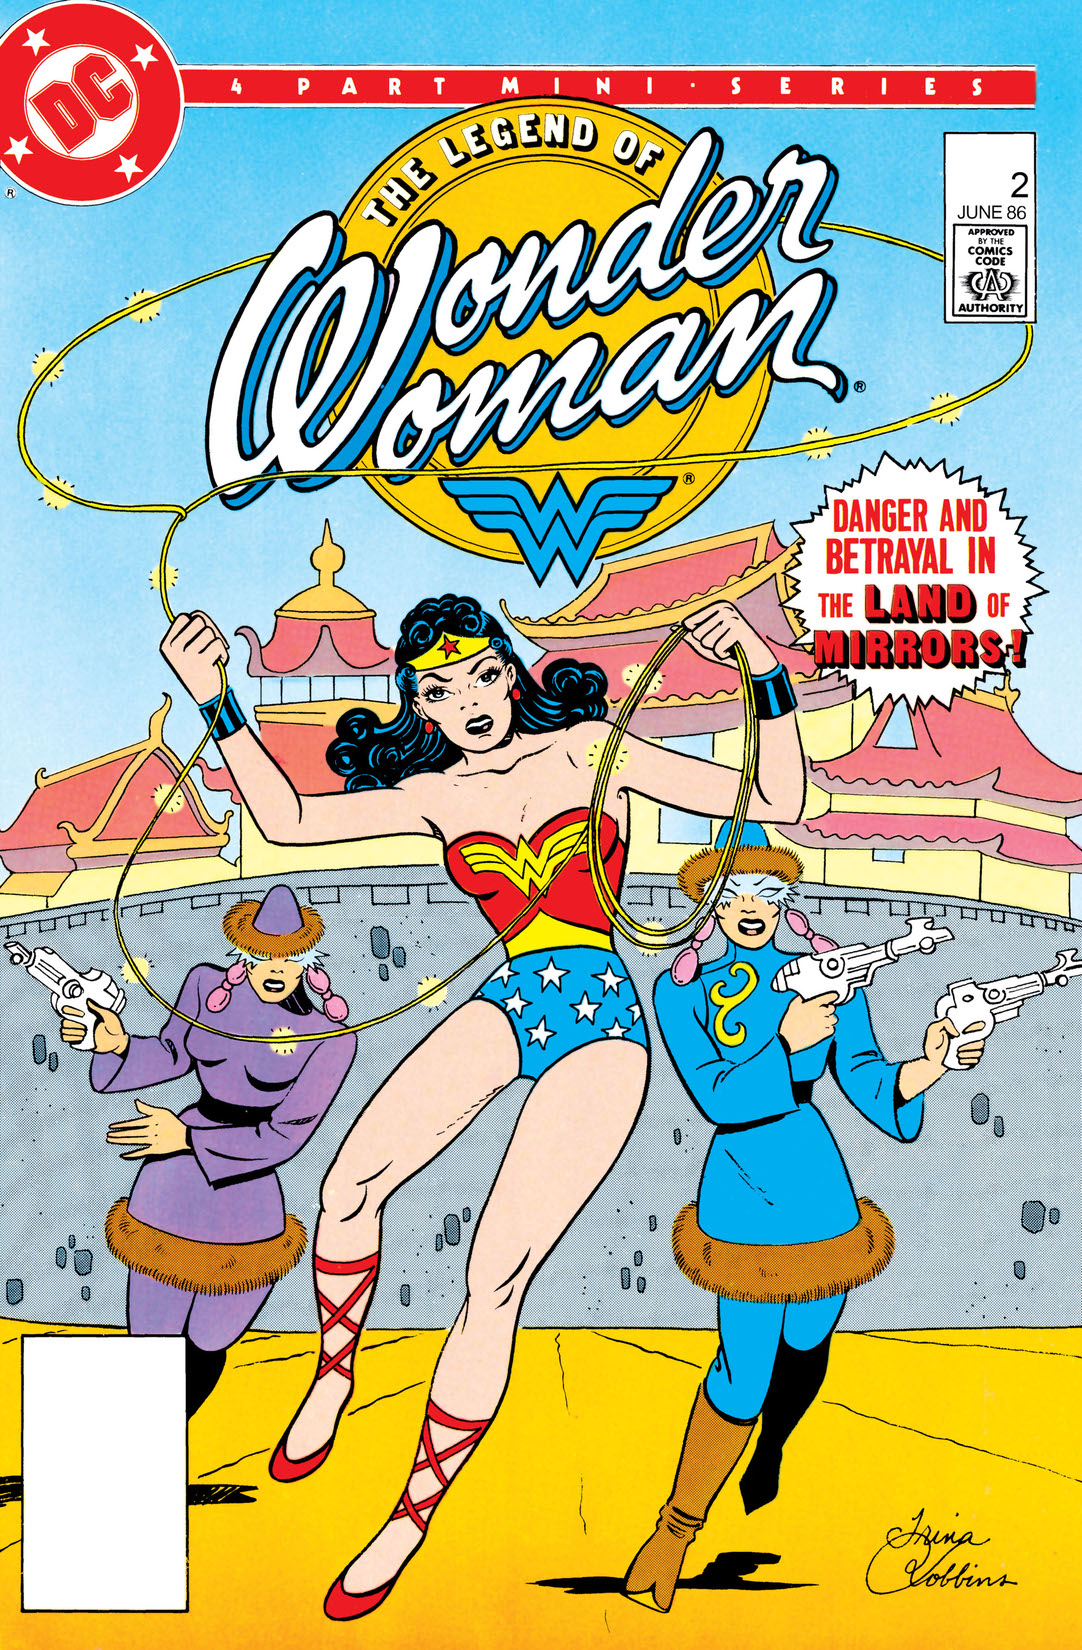 The Legend of Wonder Woman (1986-) #2 preview images